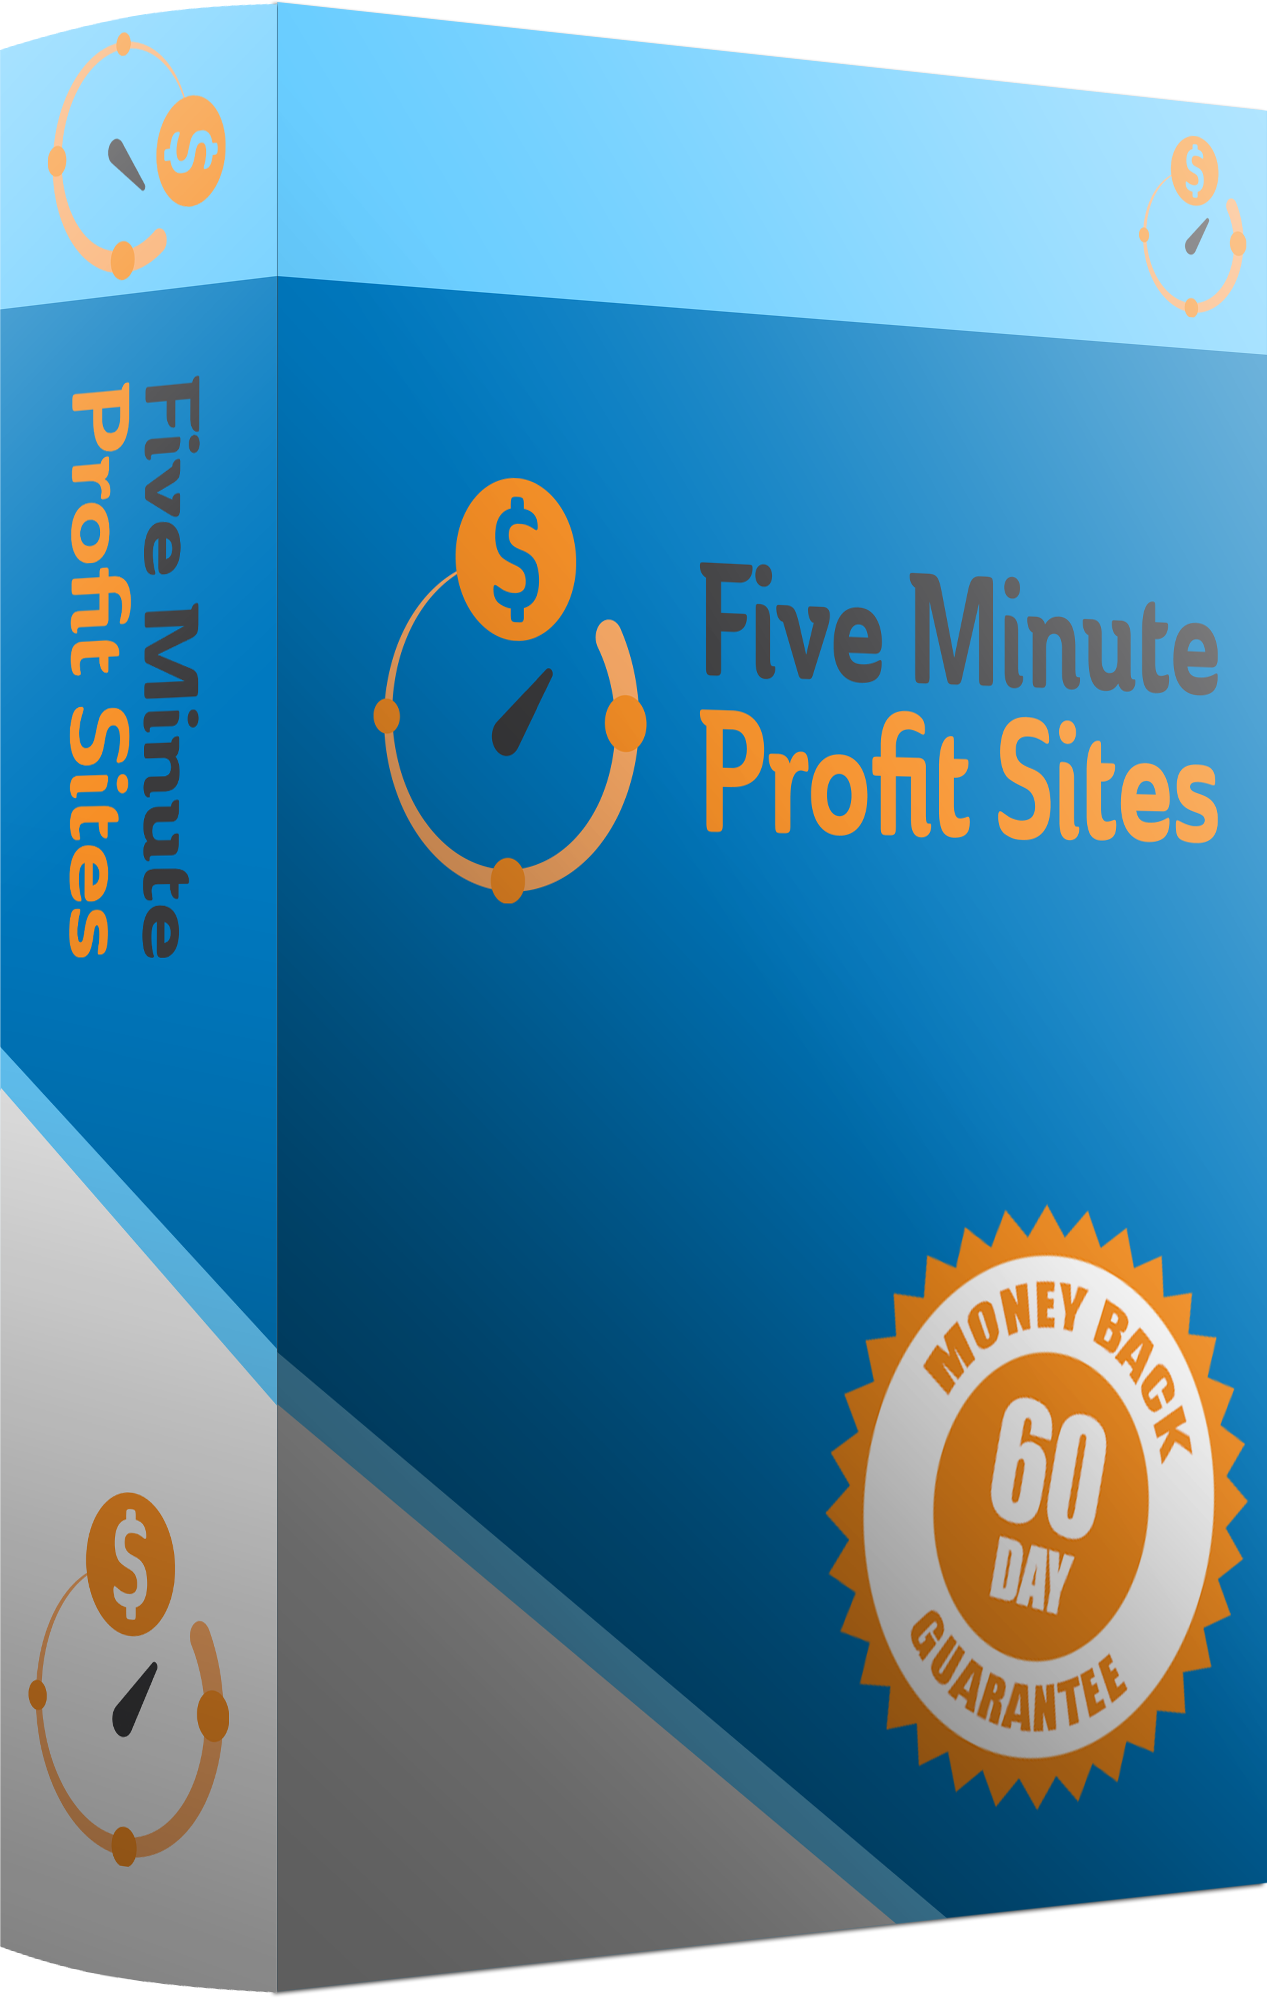 How To Make Money Online with Affiliate Marketing With Five Minute Profit Sites